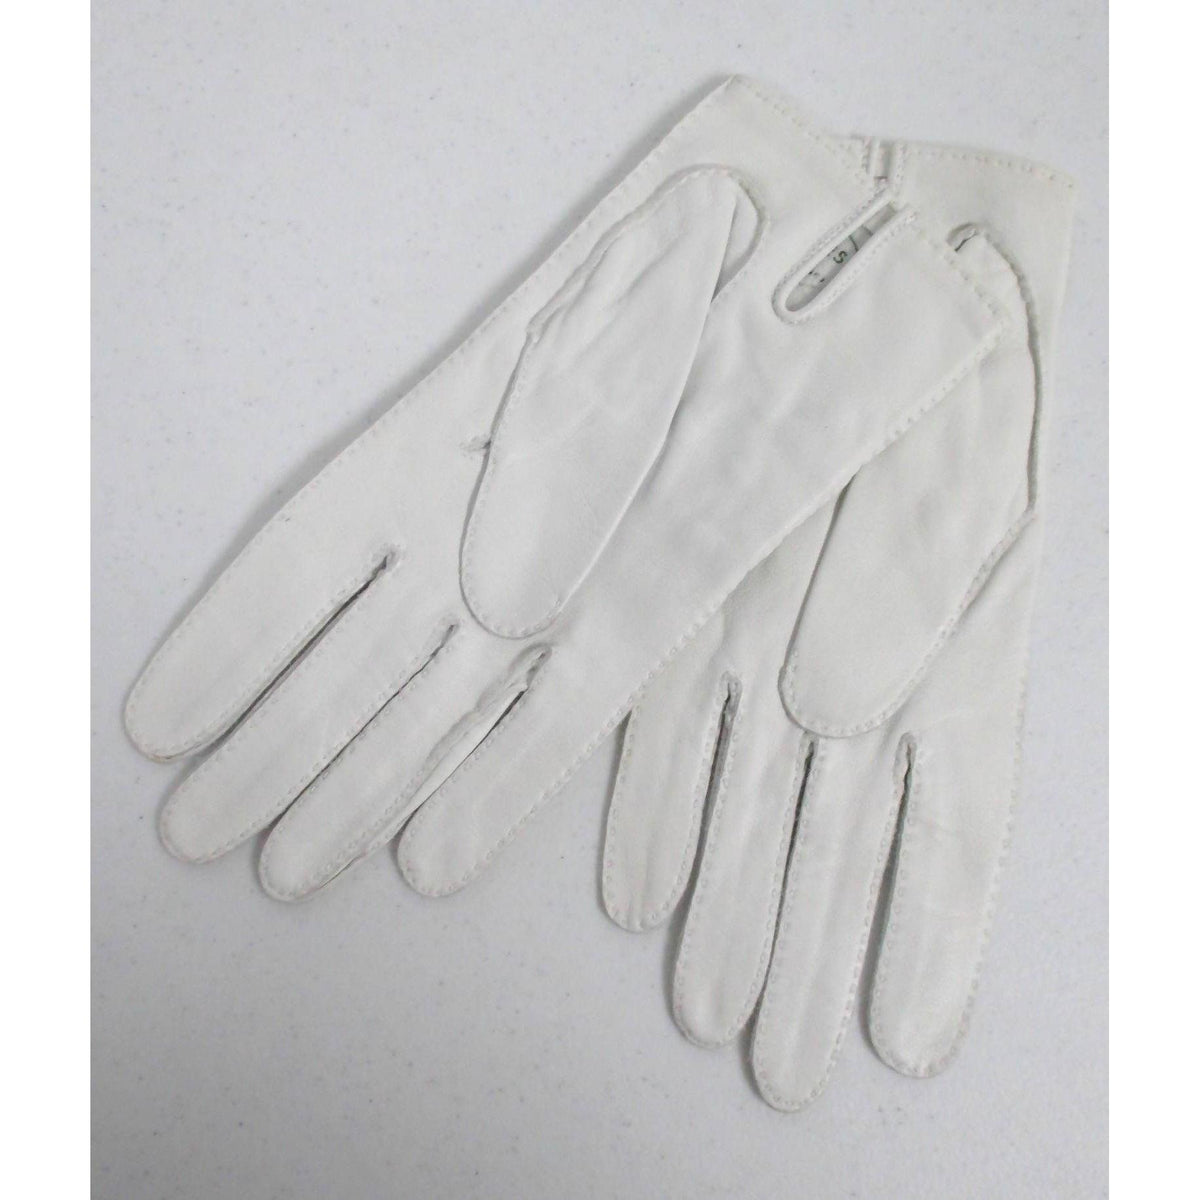 Pre-Owned HERMES White Leather Lace Up Gloves | Size 7 - theREMODA